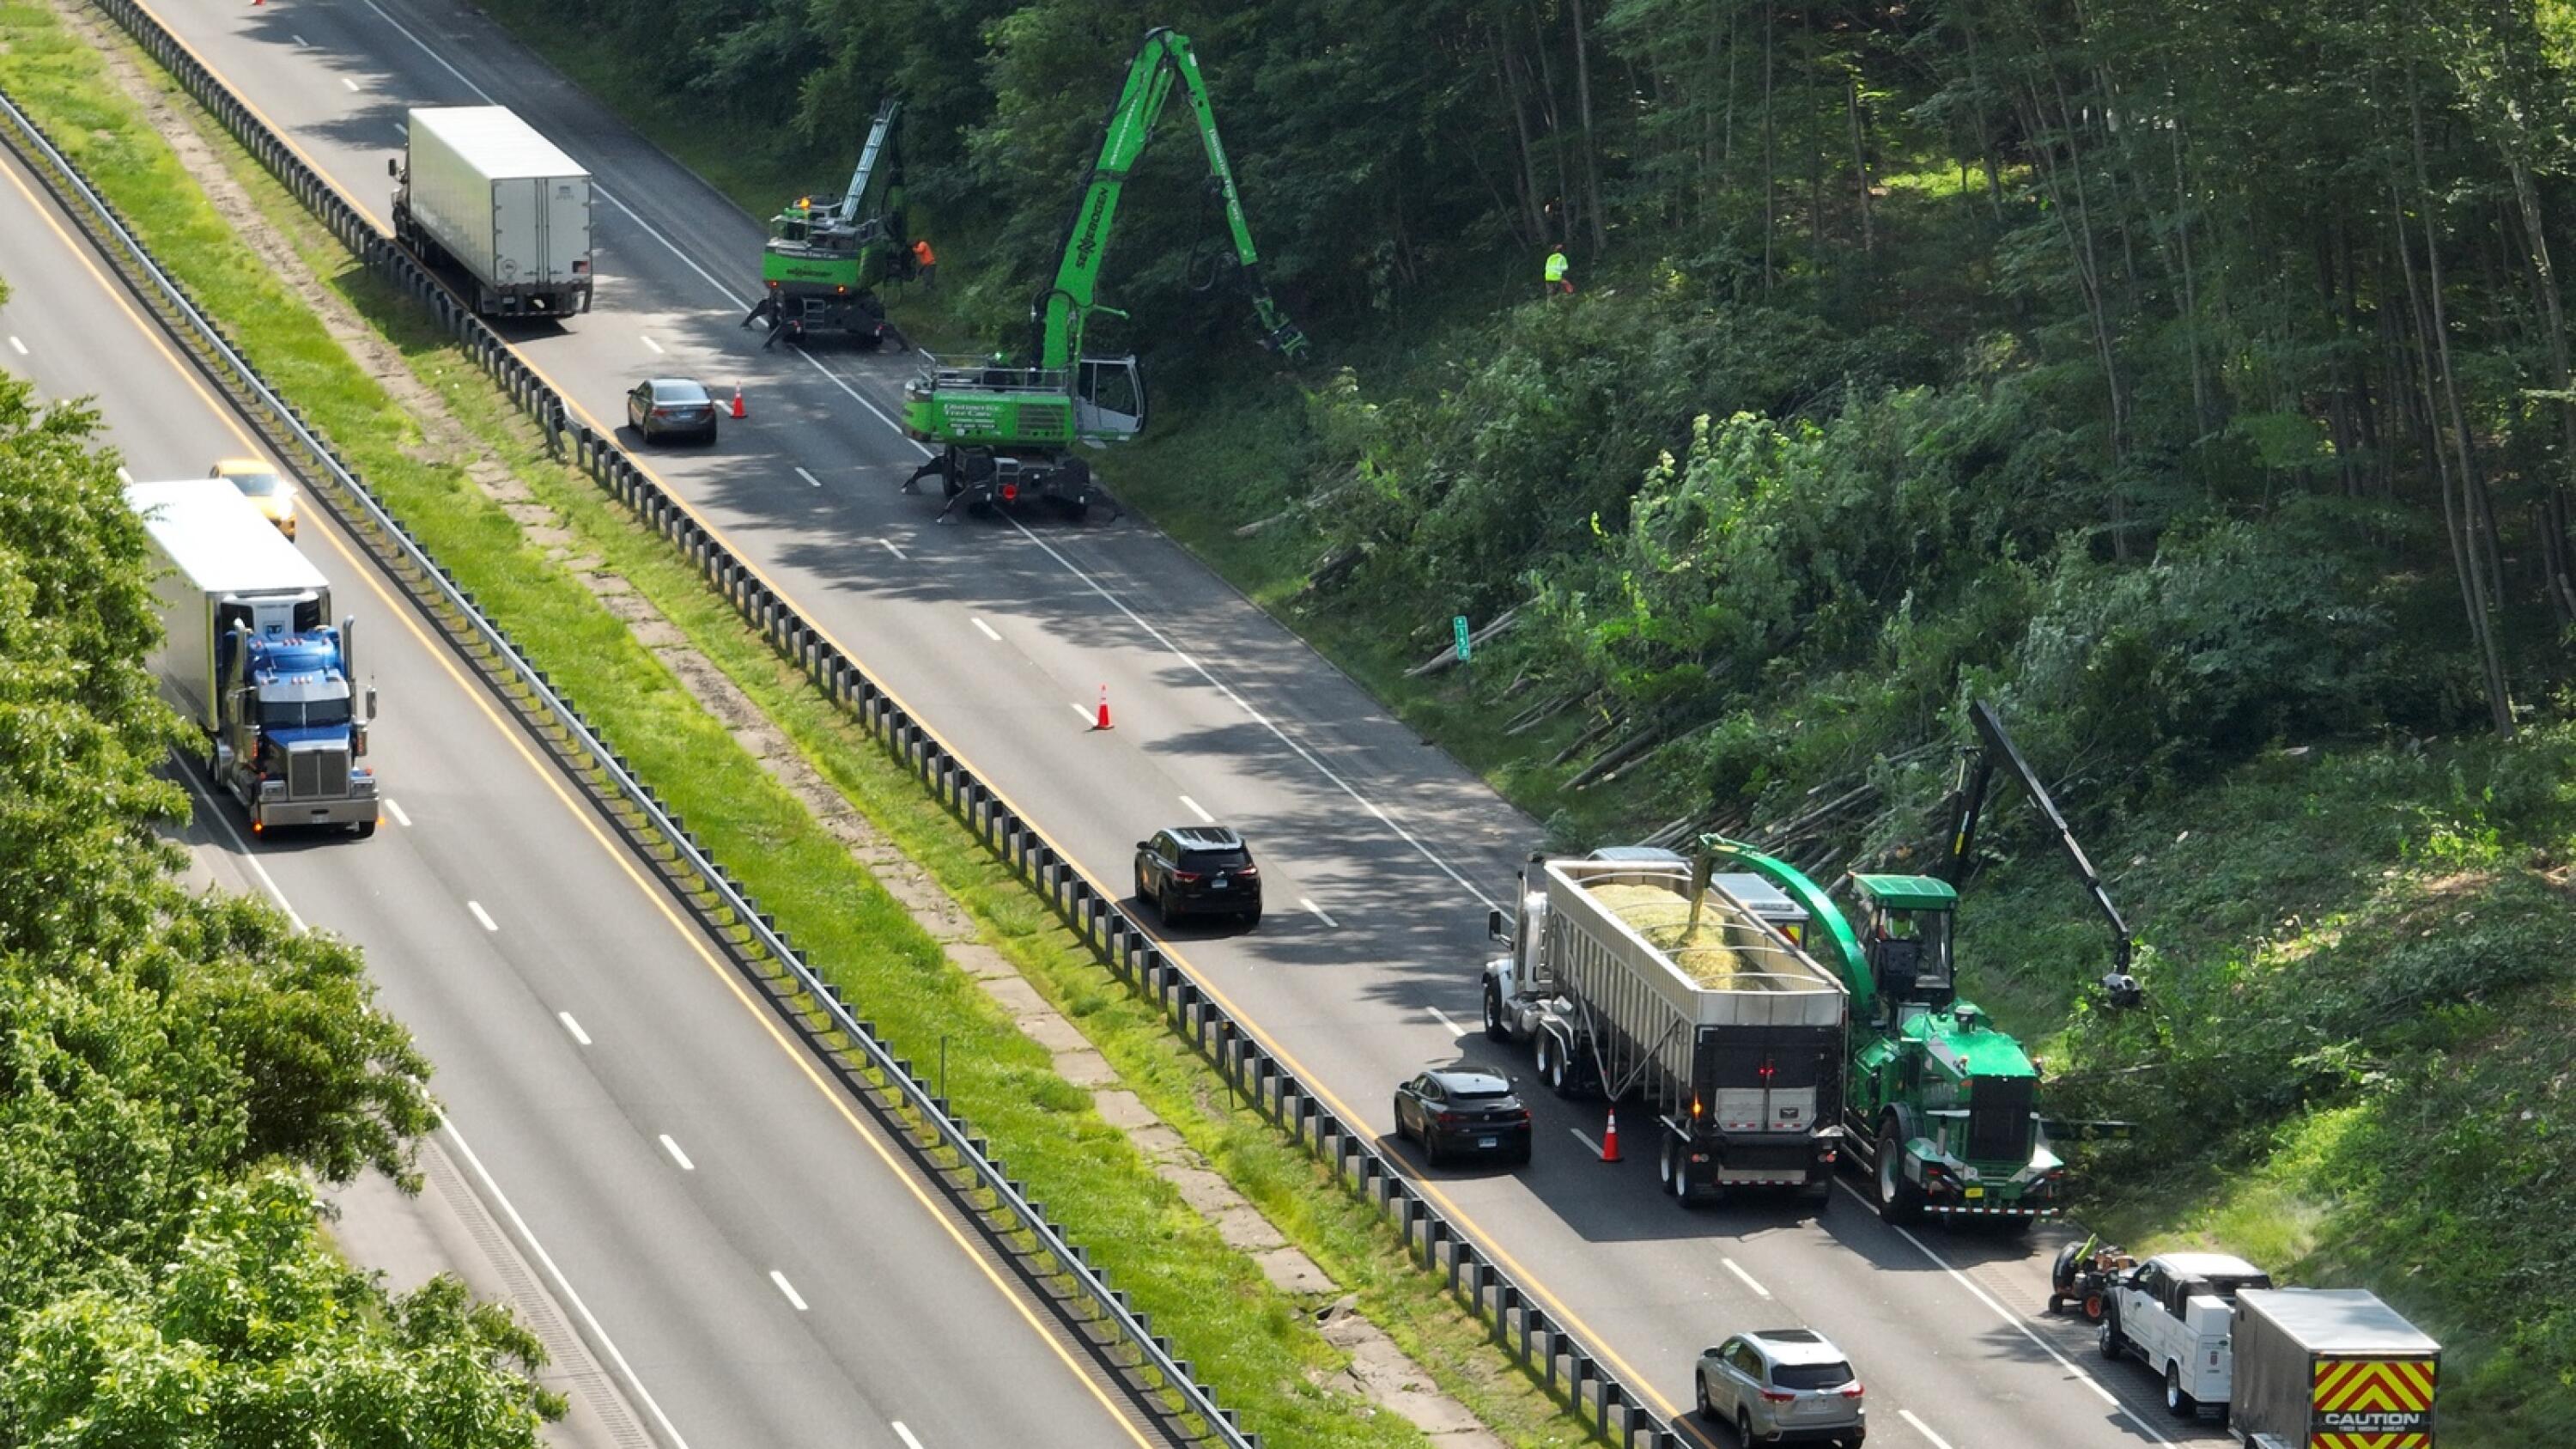 CuriousCT: Here’s why so many trees are being cut on the highway 